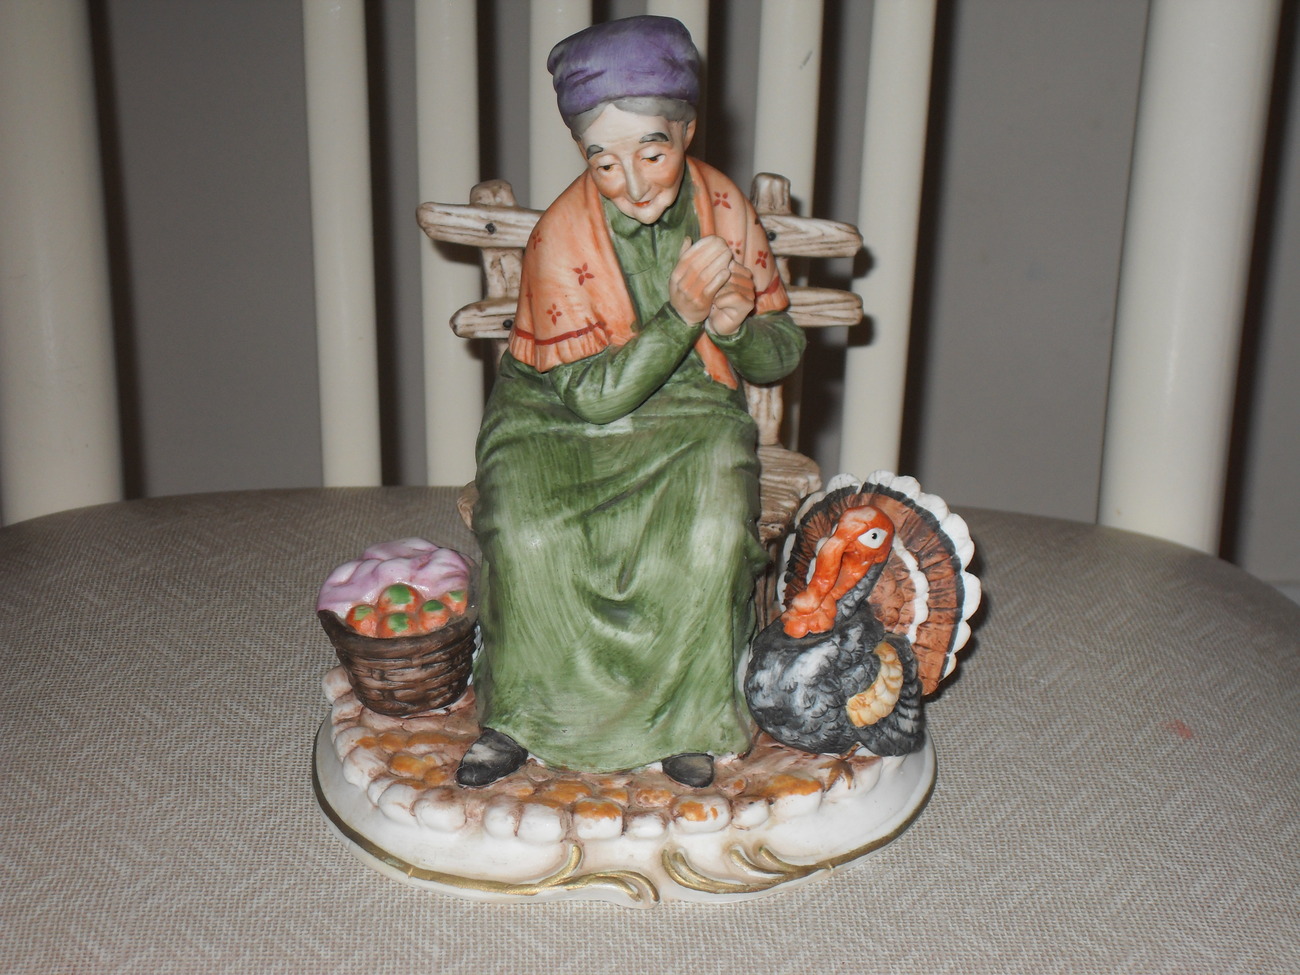 Primary image for Vintage Lefton Woman Sitting On Bench With A Turkey Porcelain Figurine